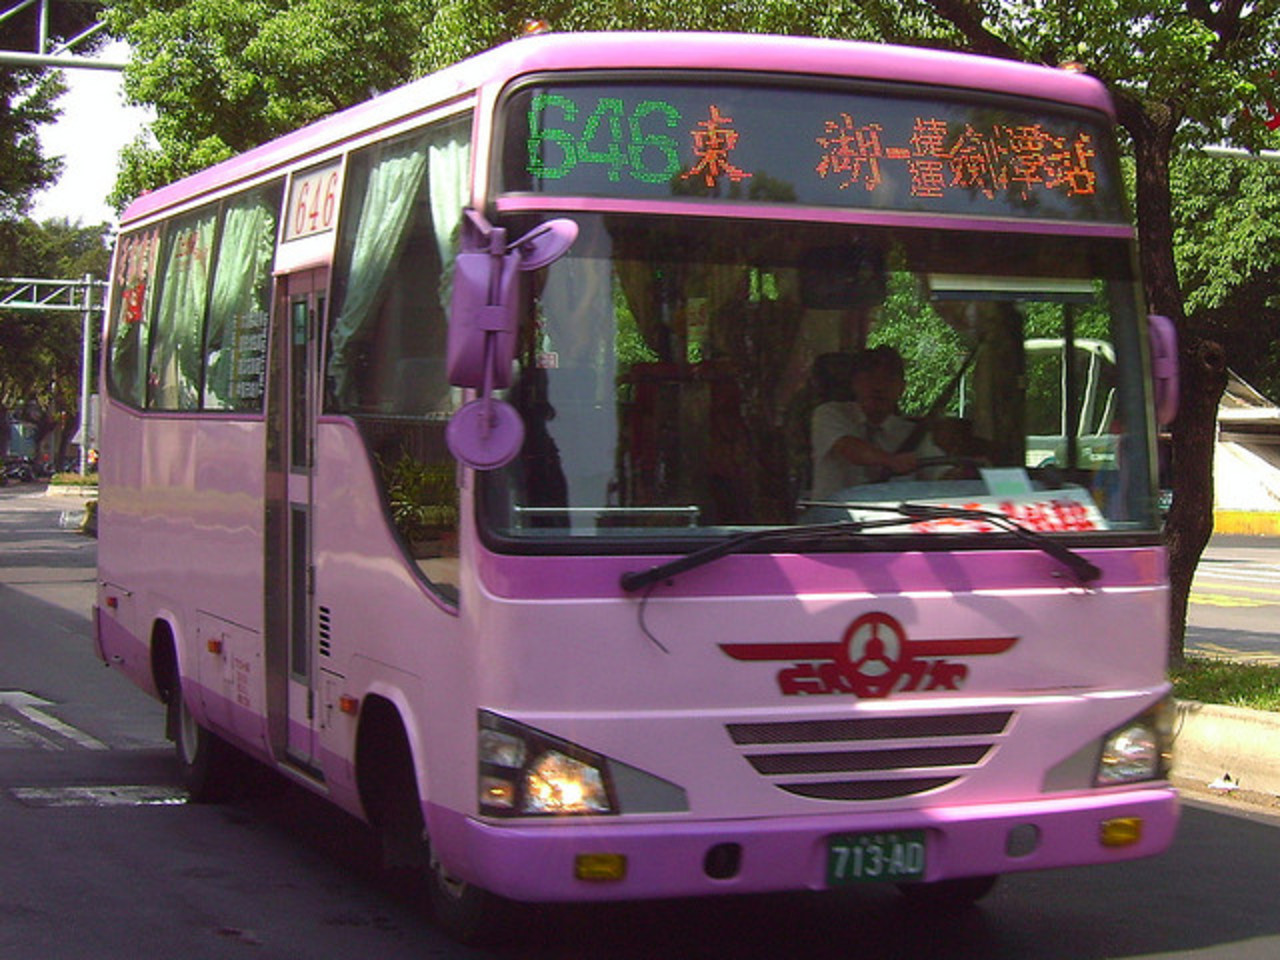 Buses in Taiwan - a set on Flickr